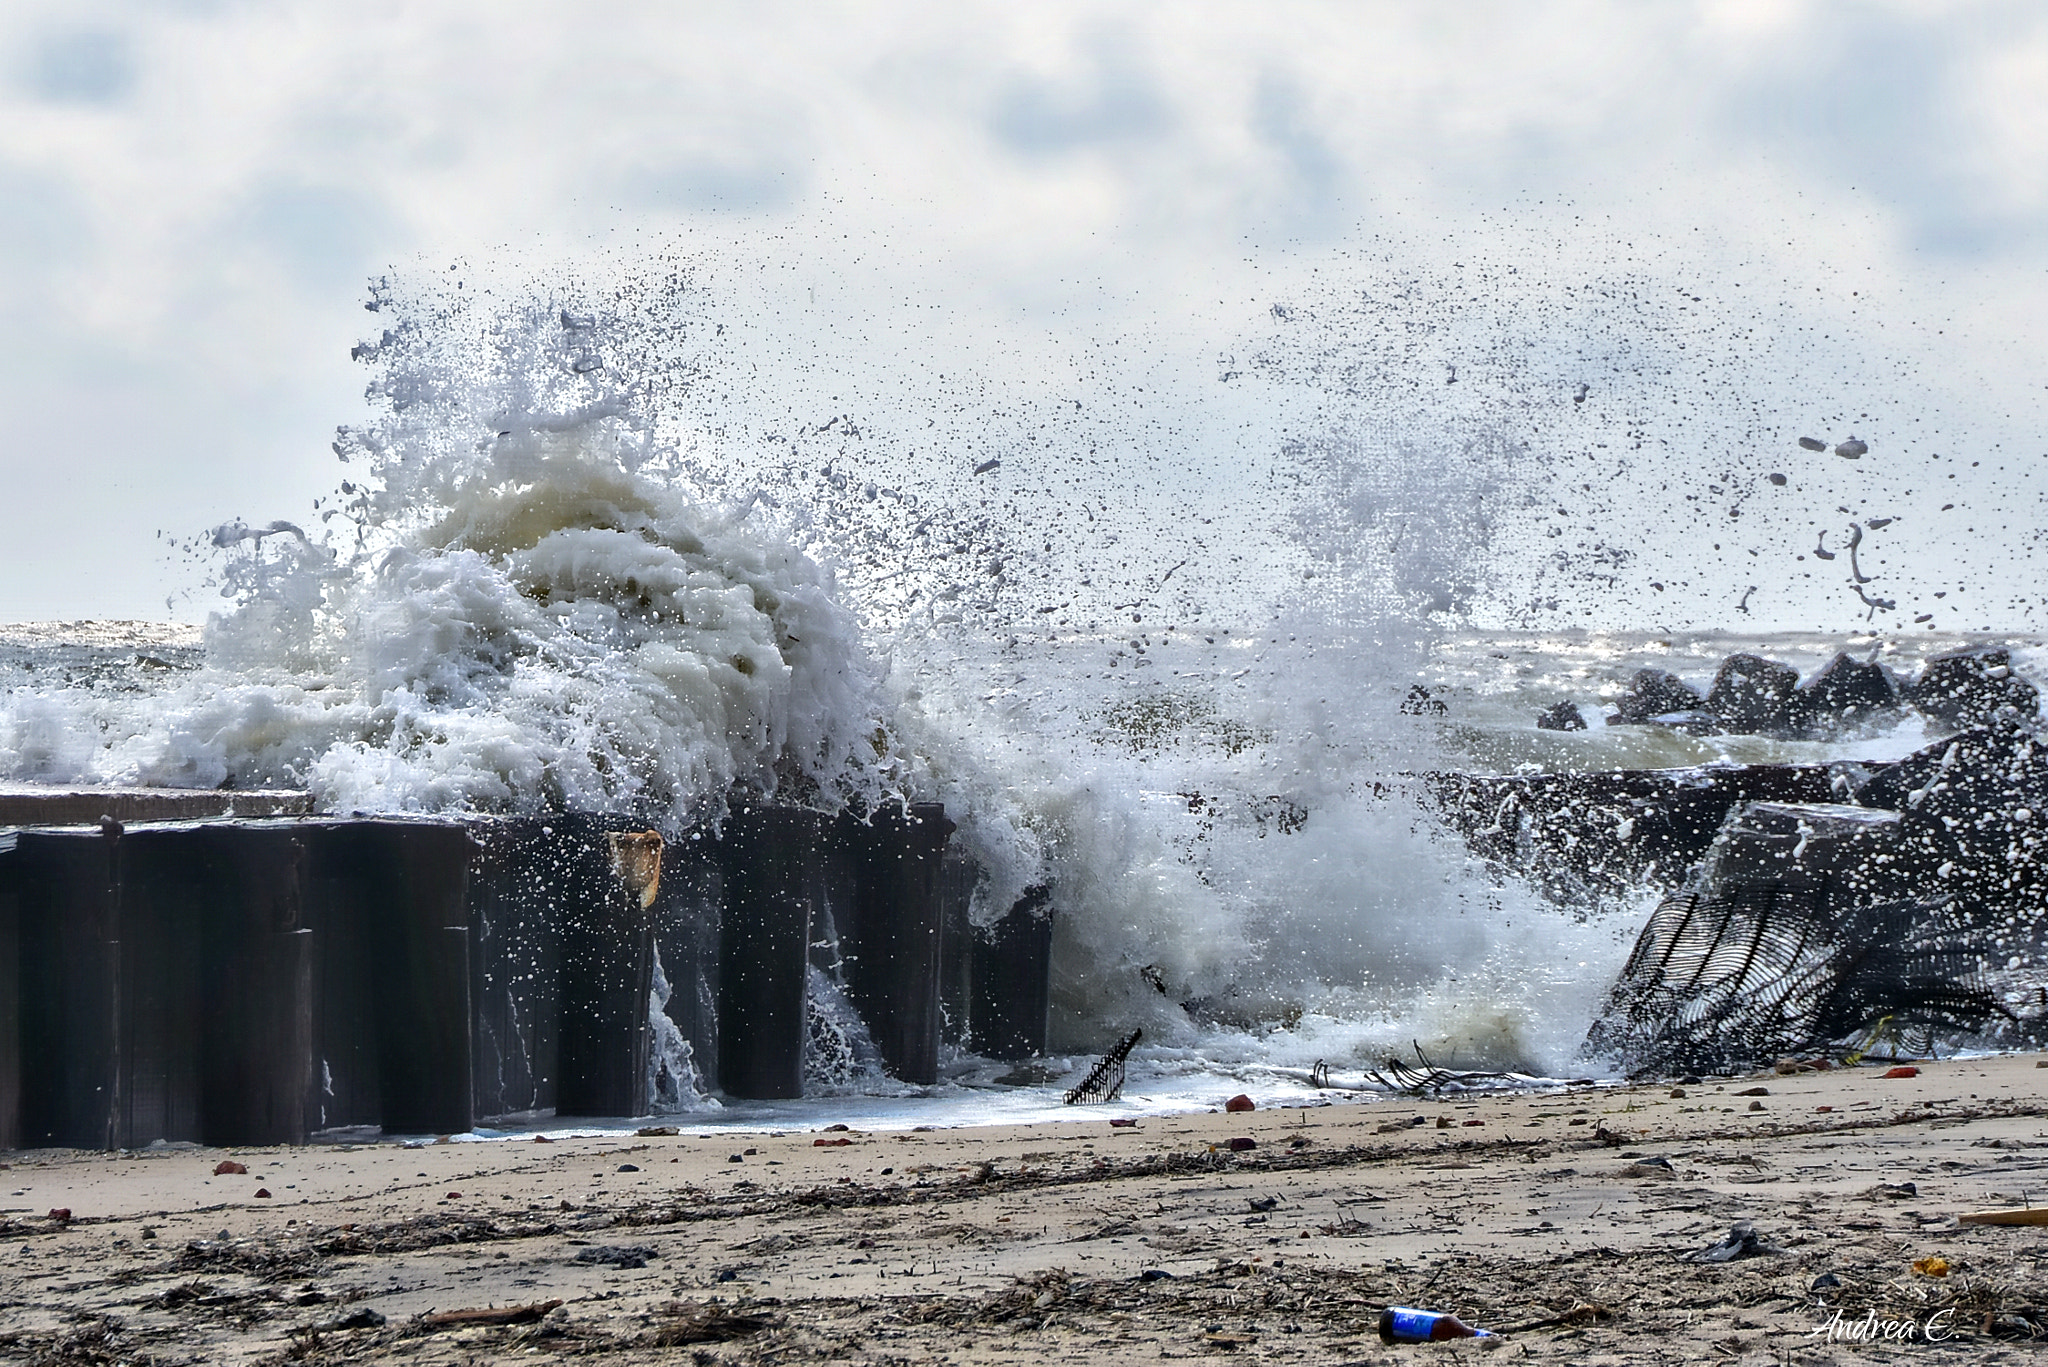 Nikon D7200 + Tamron 18-270mm F3.5-6.3 Di II VC PZD sample photo. One more crashing wave (well maybe) photography